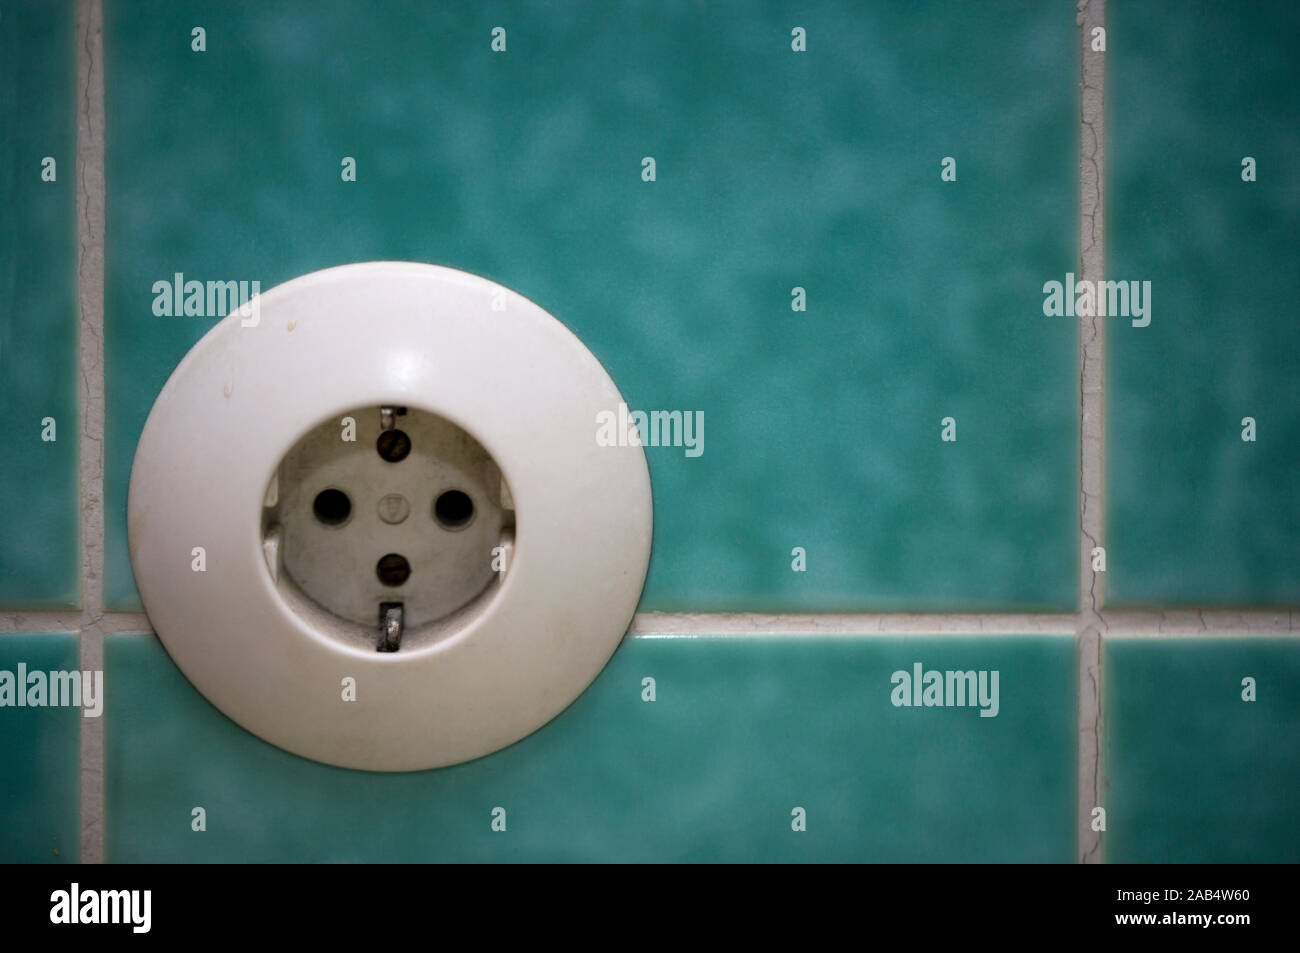 Old electrical socket on tiles in a bathroom Stock Photo